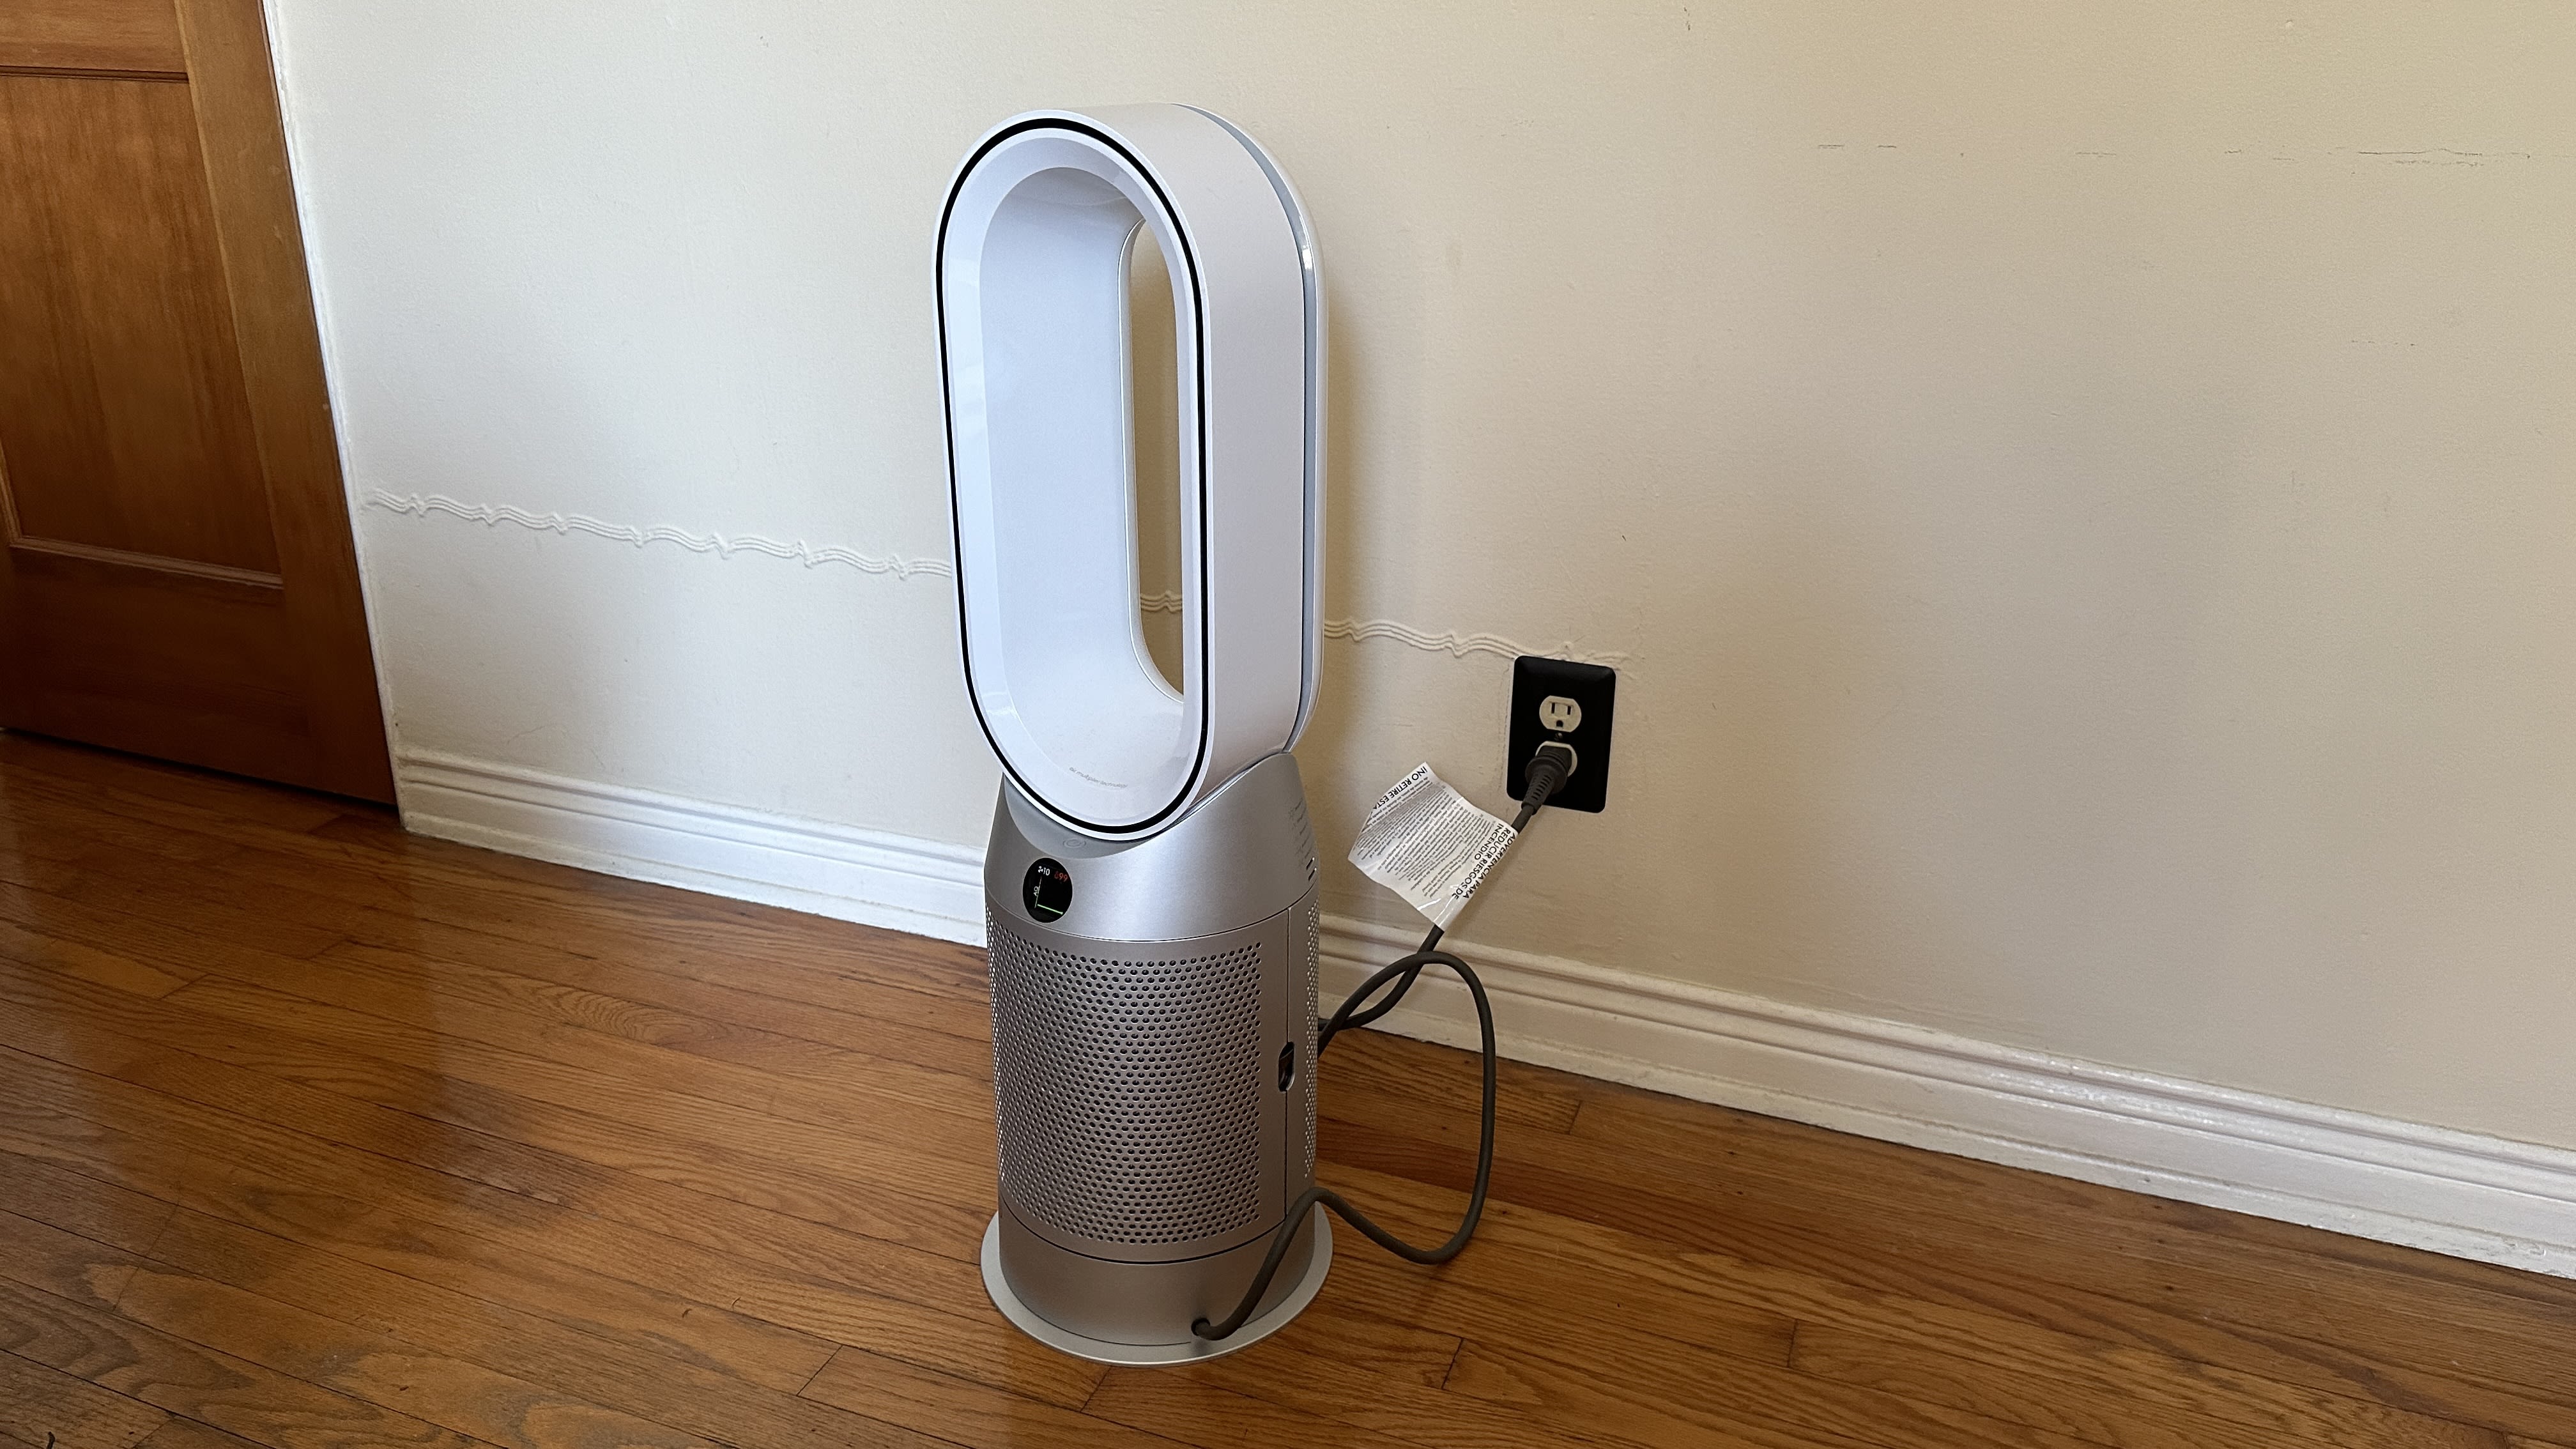 s best space heaters with thousands of perfect ratings start at $25  - TheStreet